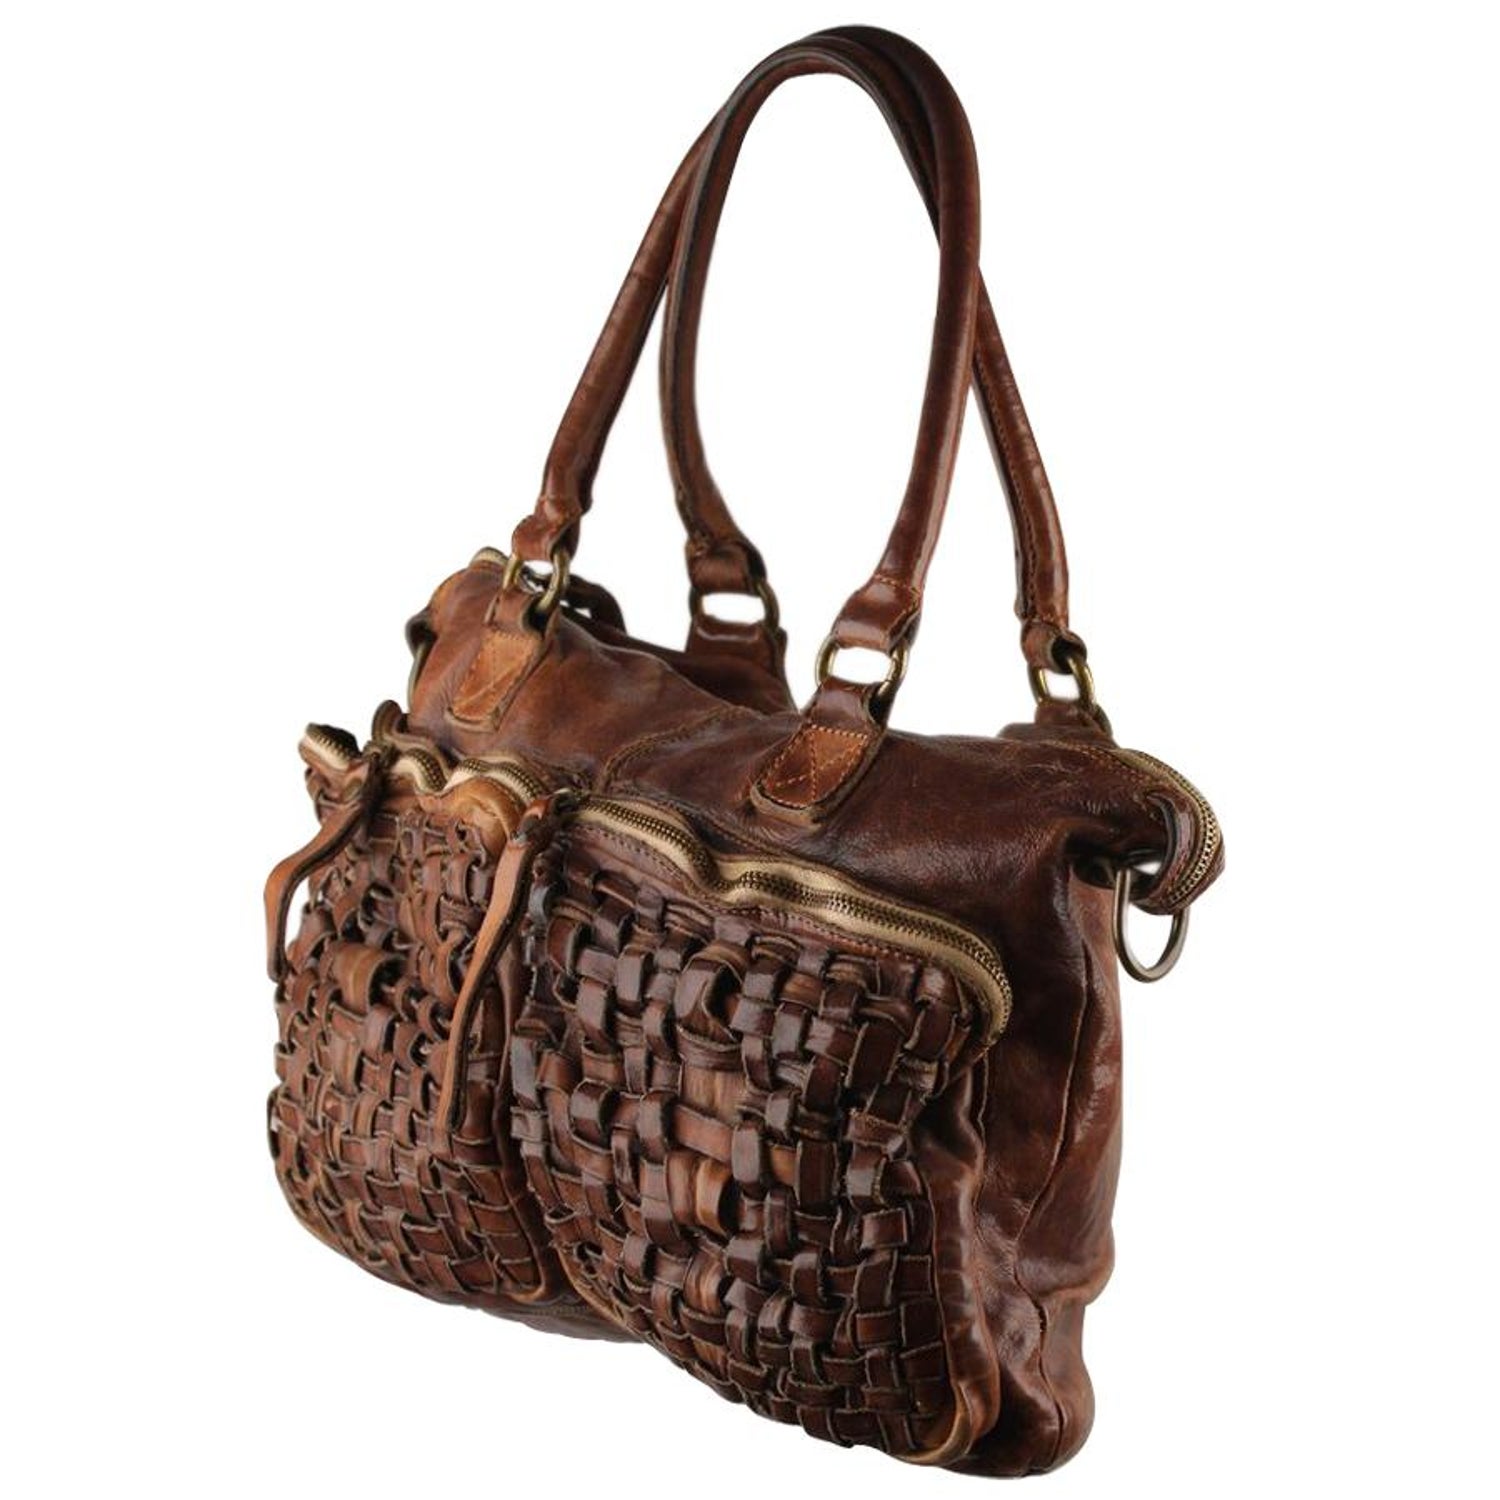 Campomaggi Satchel Bag with Woven Pockets For Sale at 1stDibs